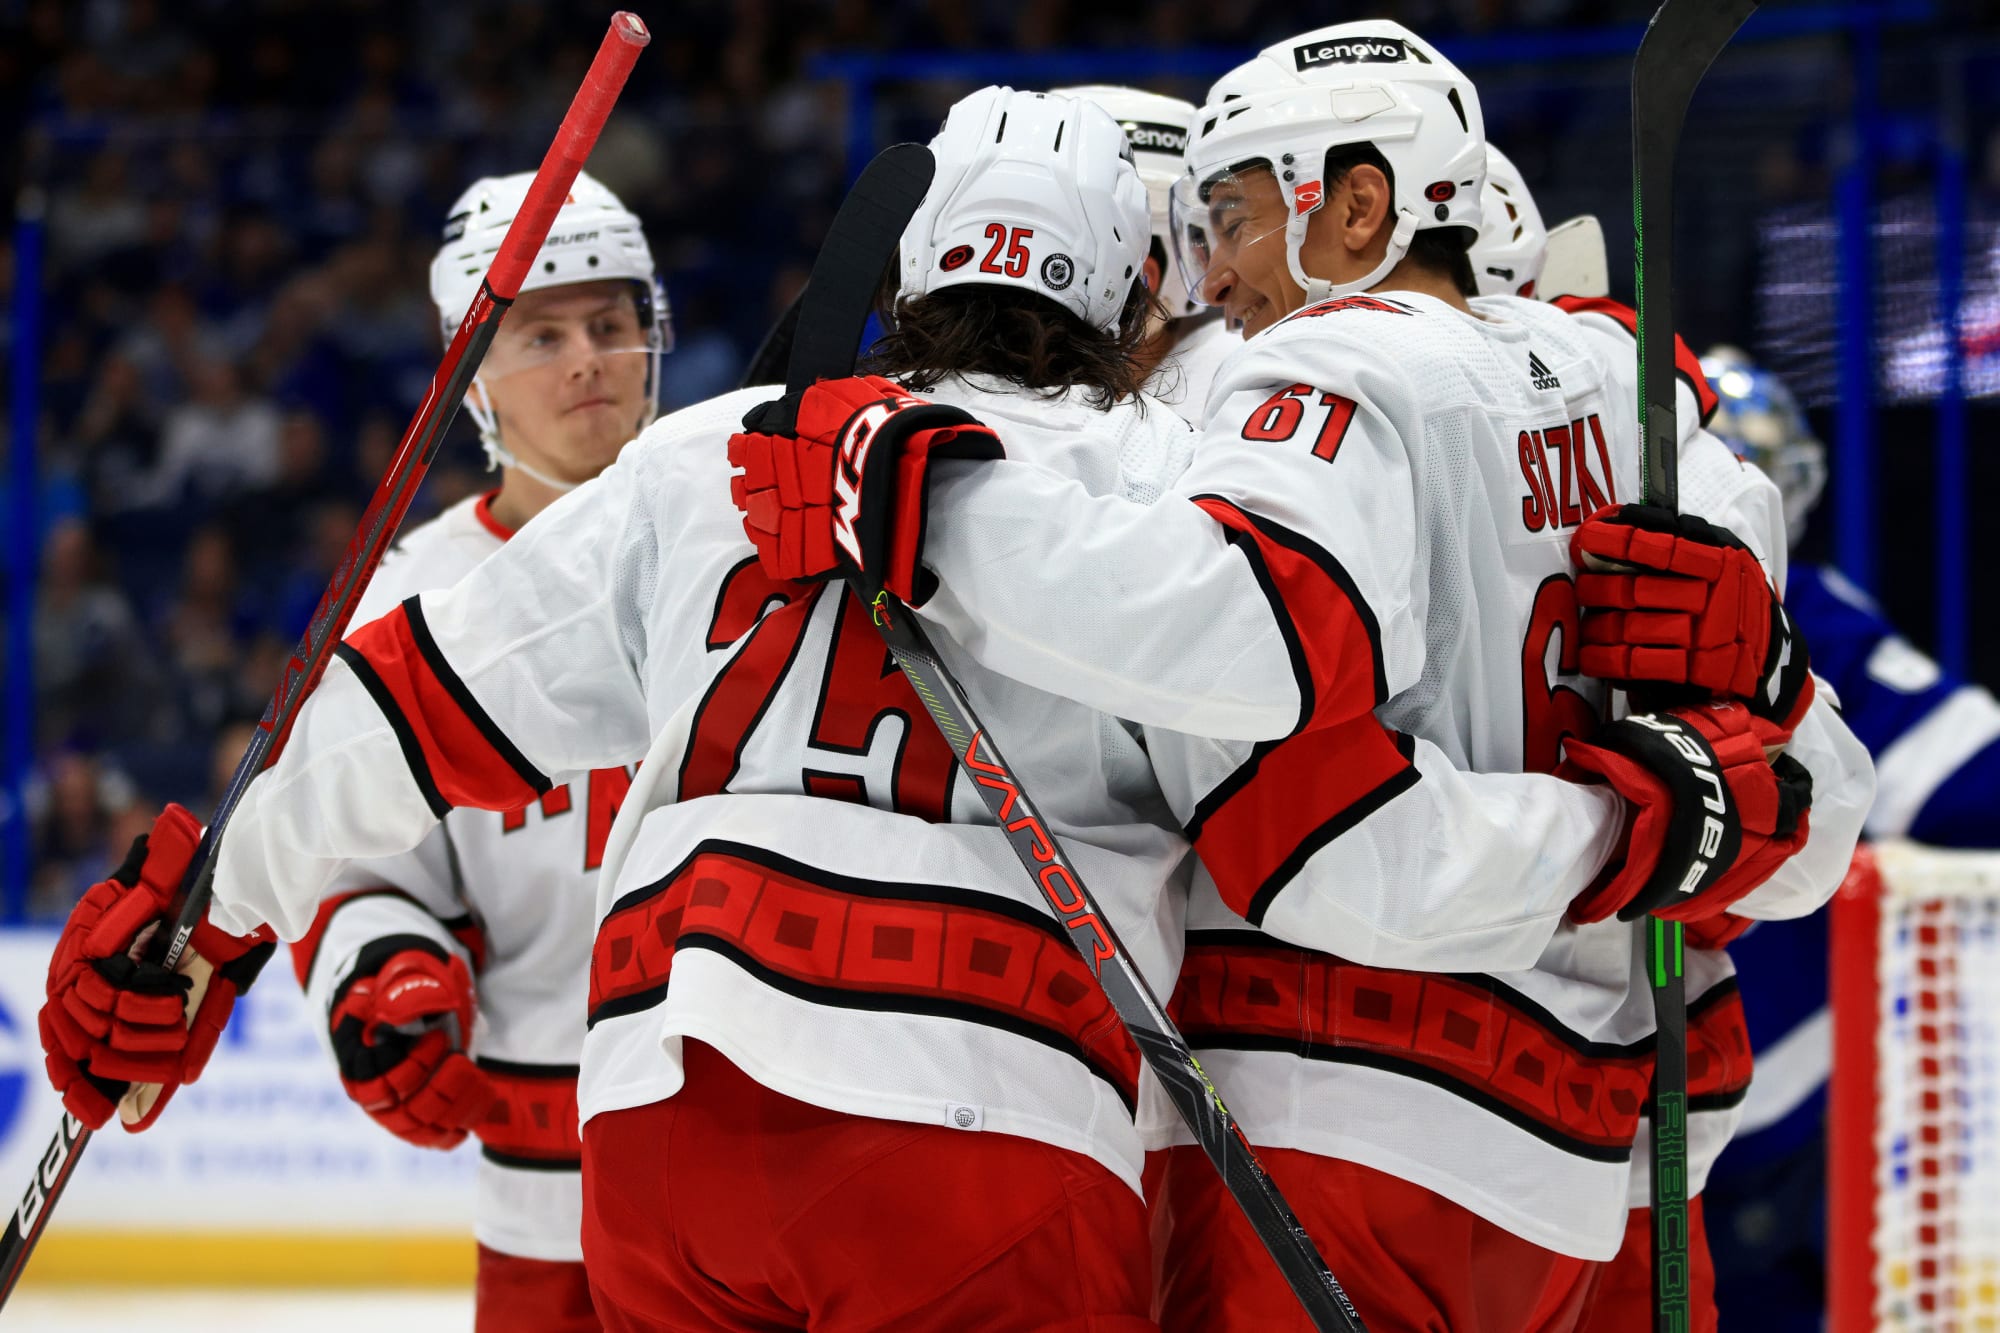 What did the Hurricanes accomplish in the 2021-22 season?